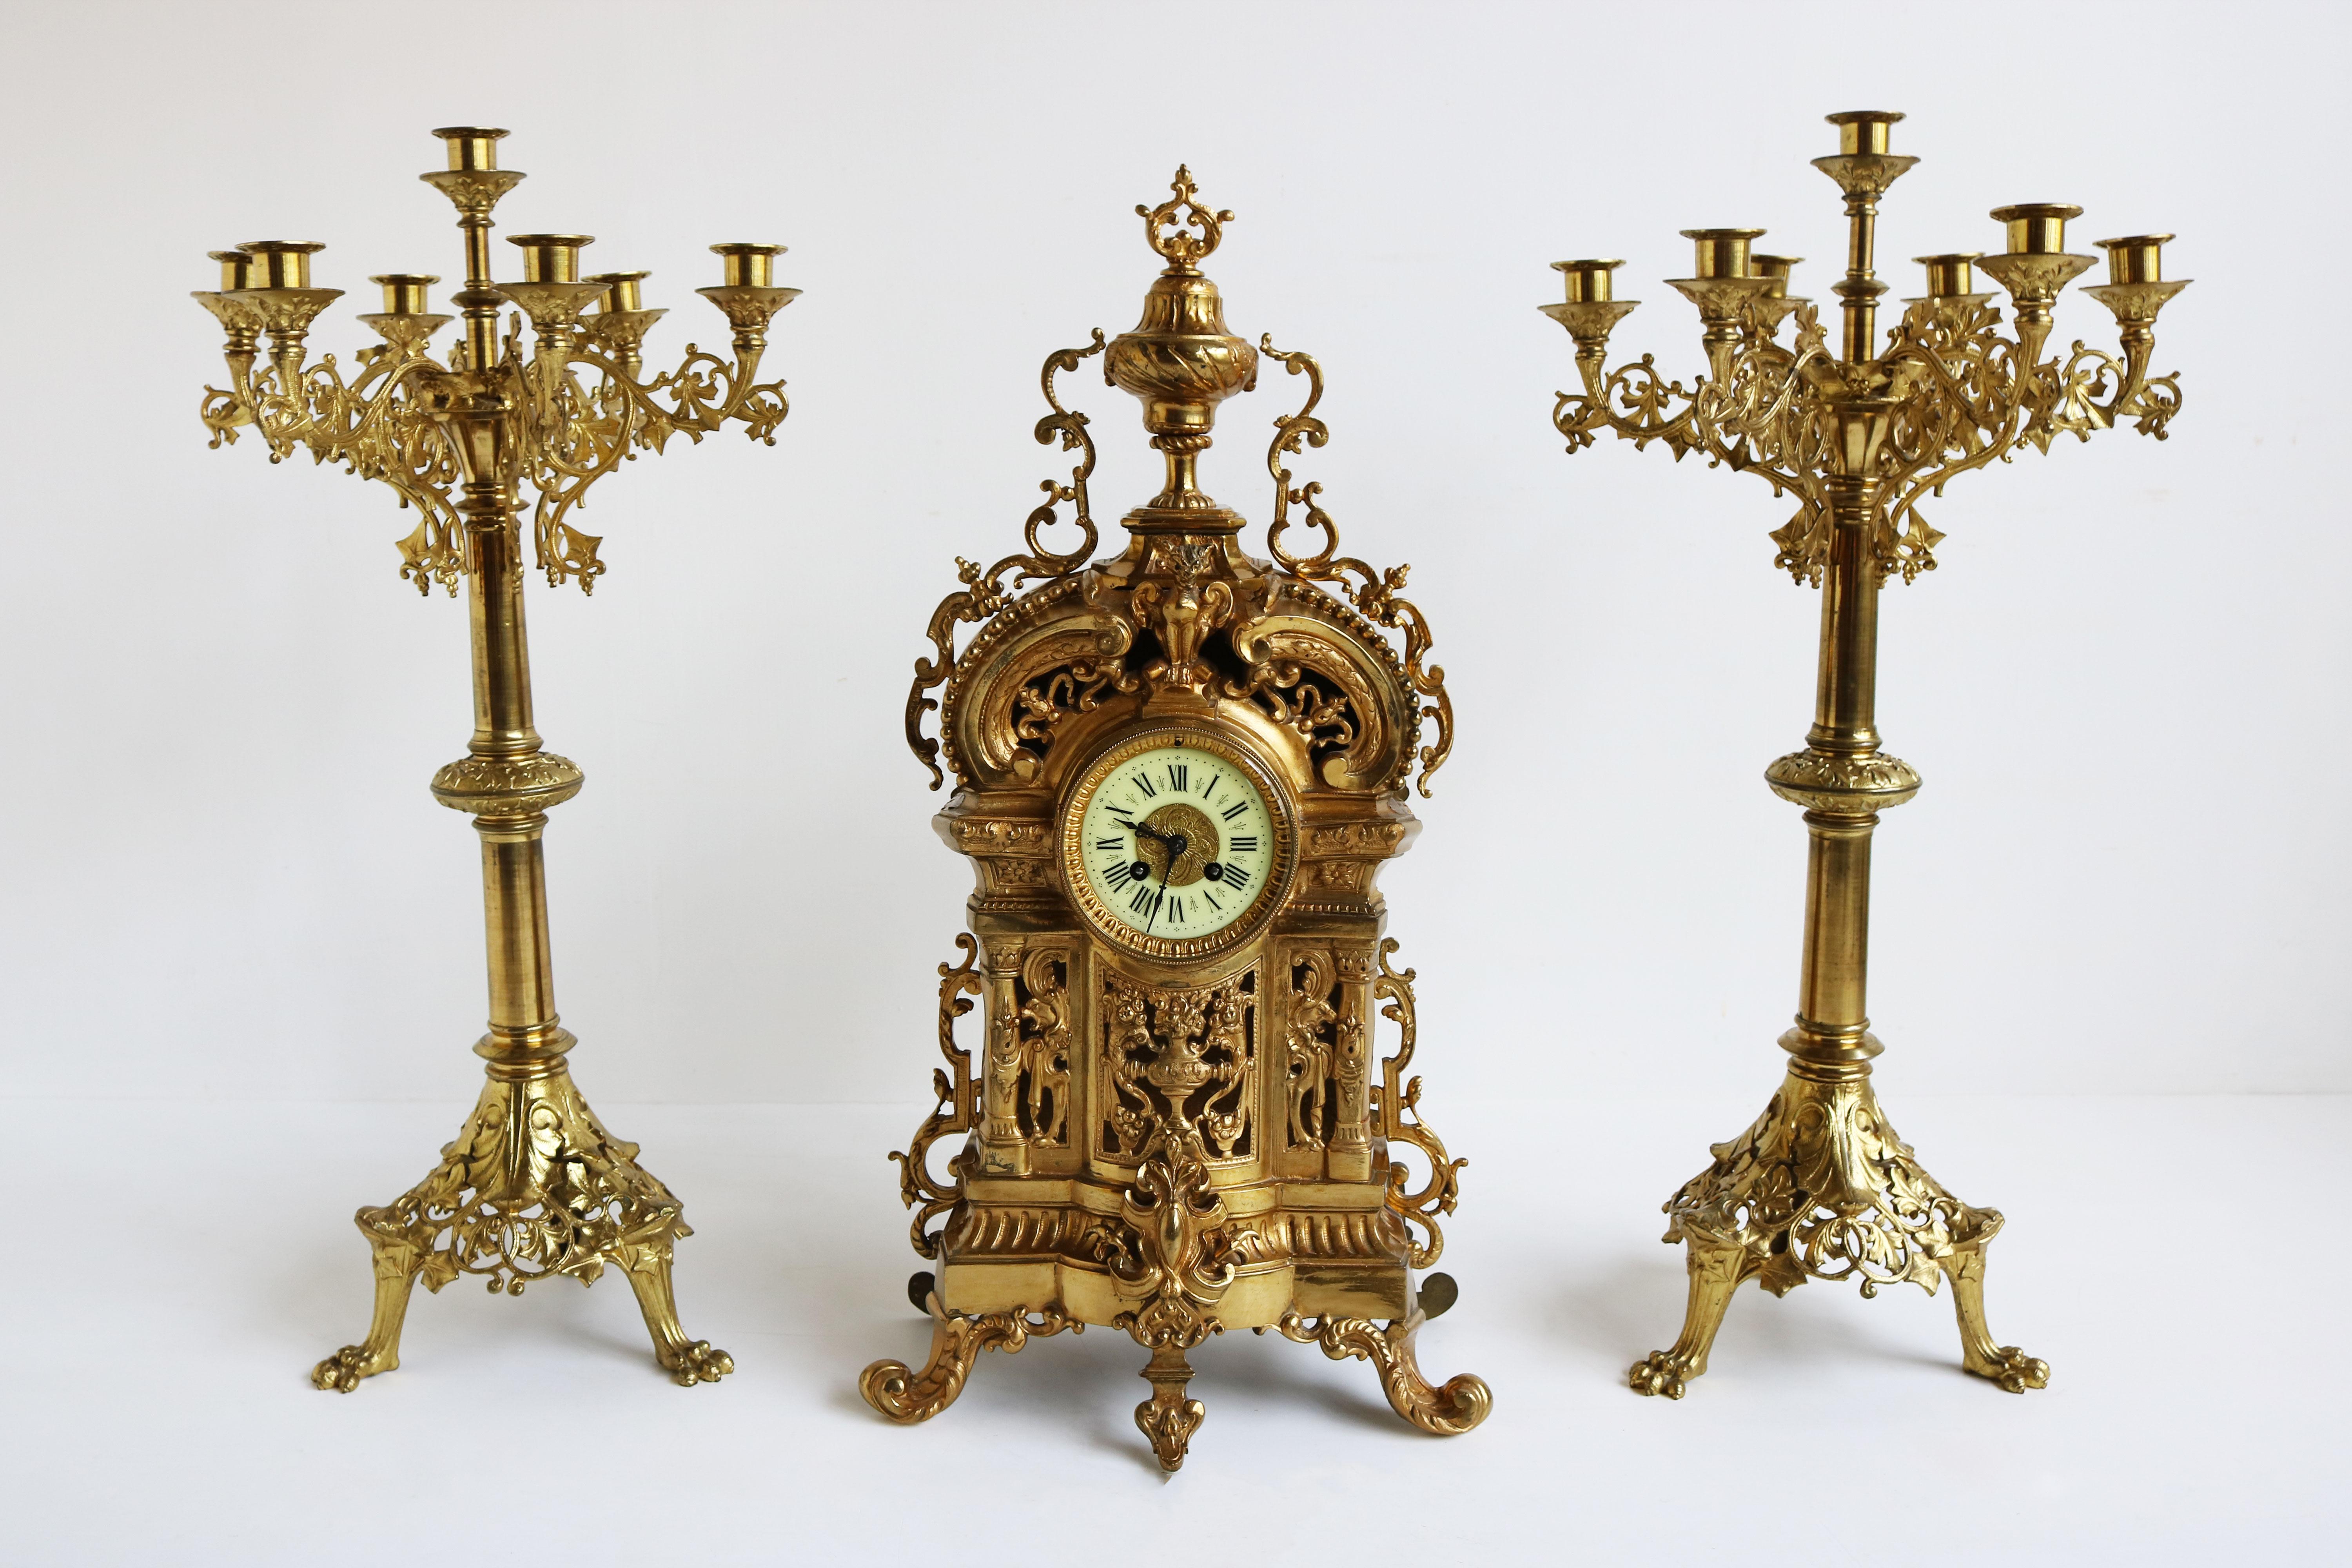 Most impressive this large antique French classical Clock set from late 19th century France. 
The candelabras are huge and impressively decorated with acanthus leaves. They have place for 7 candles. 
The Clock is in working order & in fully